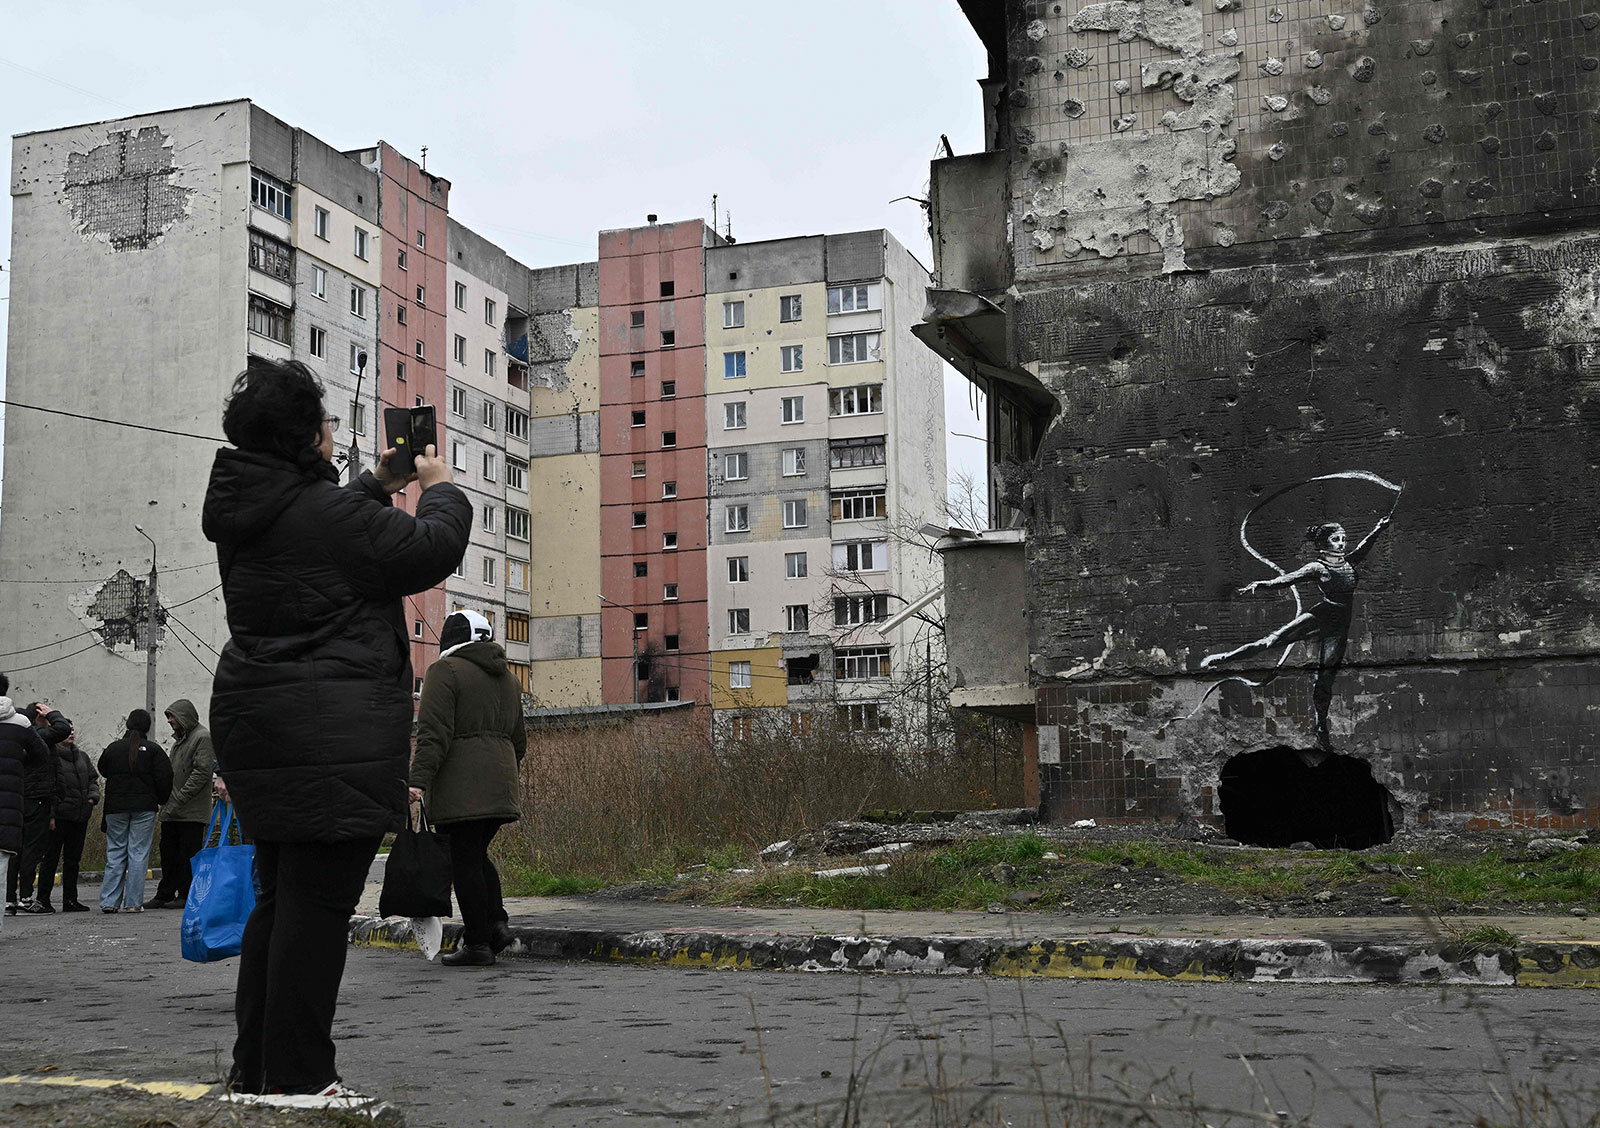 A local resident takes a picture of the artwork on the wall of a destroyed residential building, in Irpin, Ukraine, on November 12, 2022.